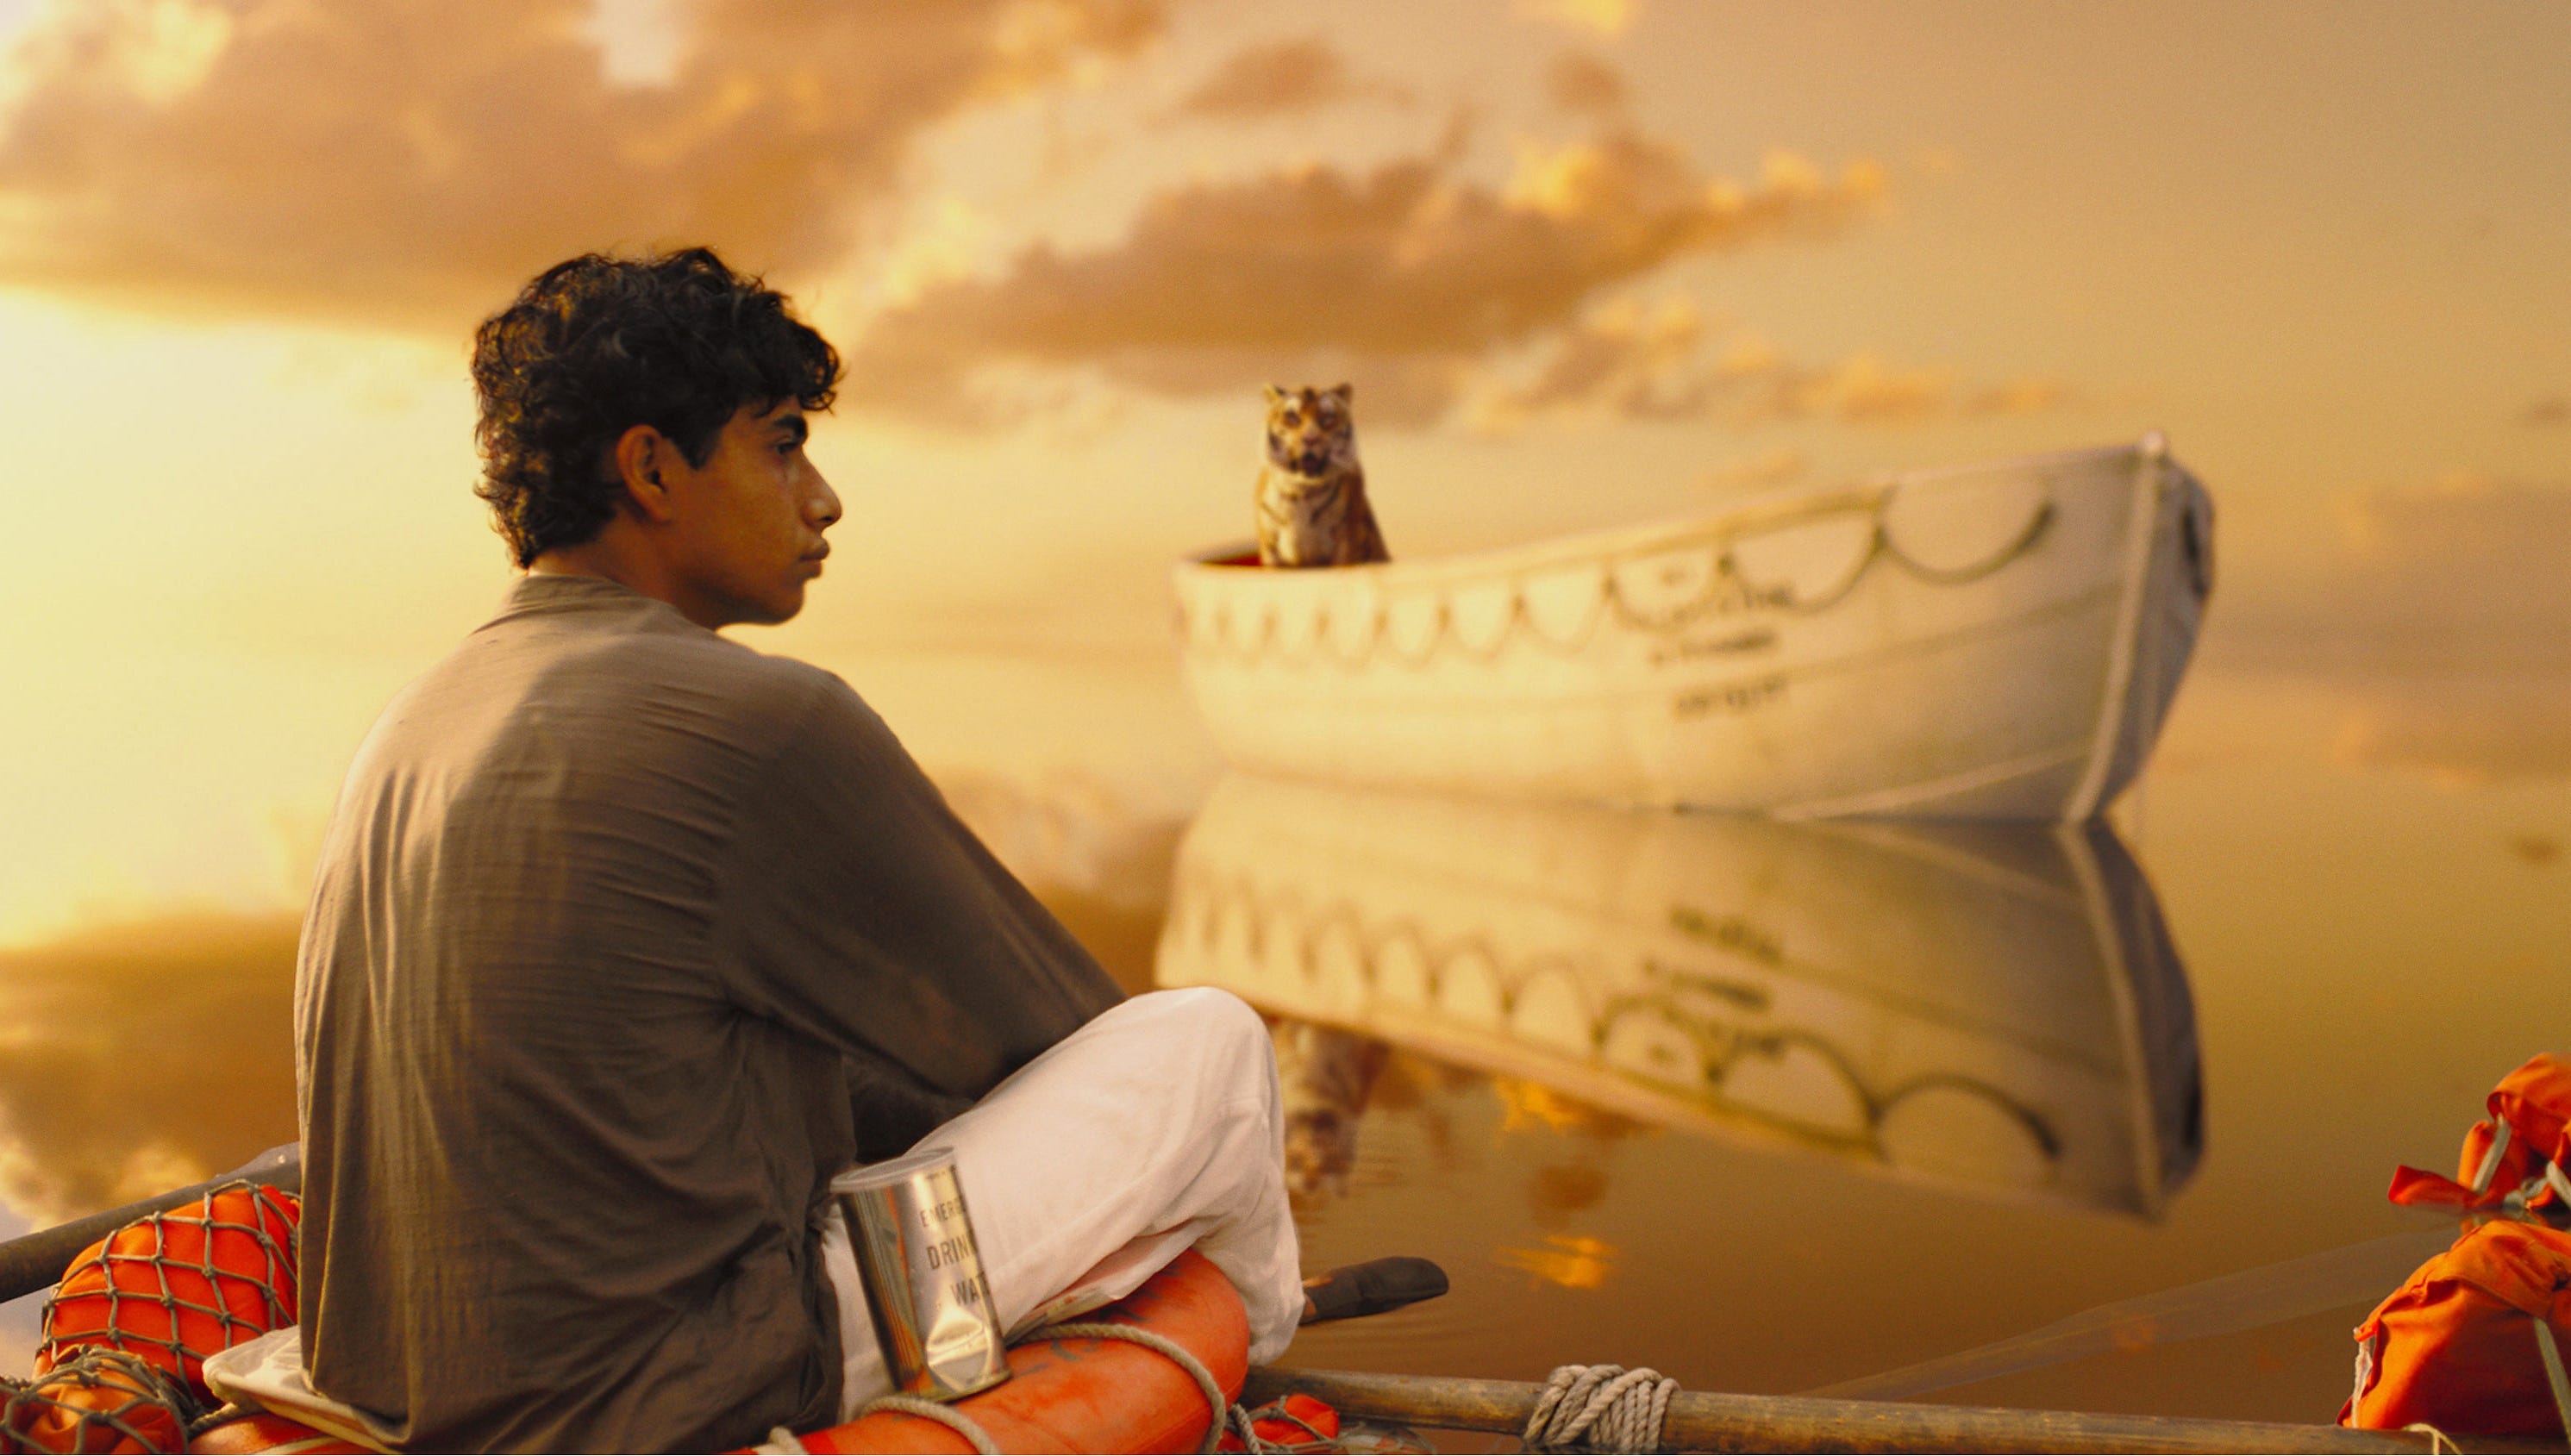 Life of Pi' is a visual and emotional tiger